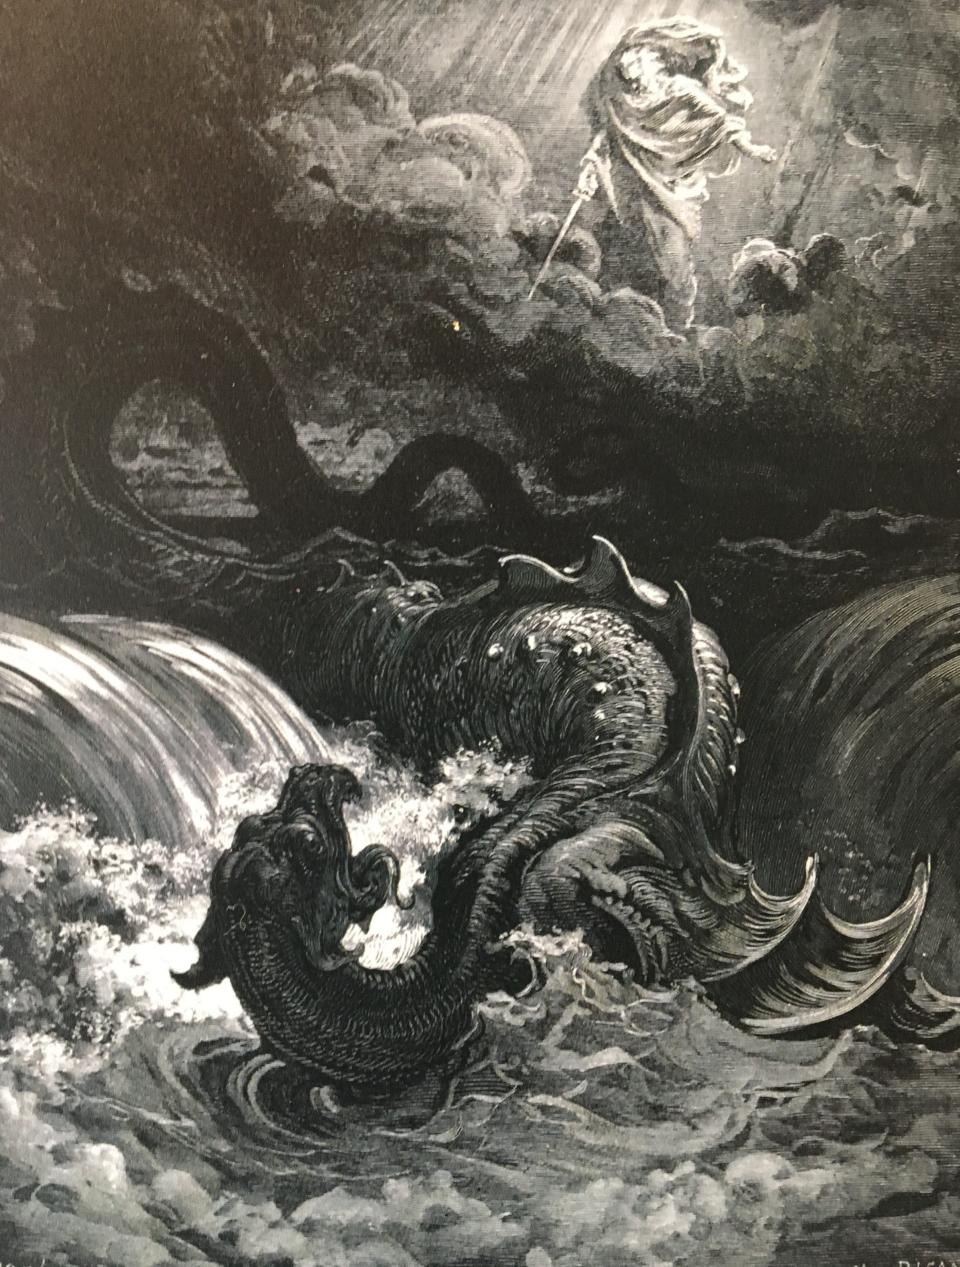 "The Destruction of the Leviathan," by Gustave Dore, 1865 (reproduction).